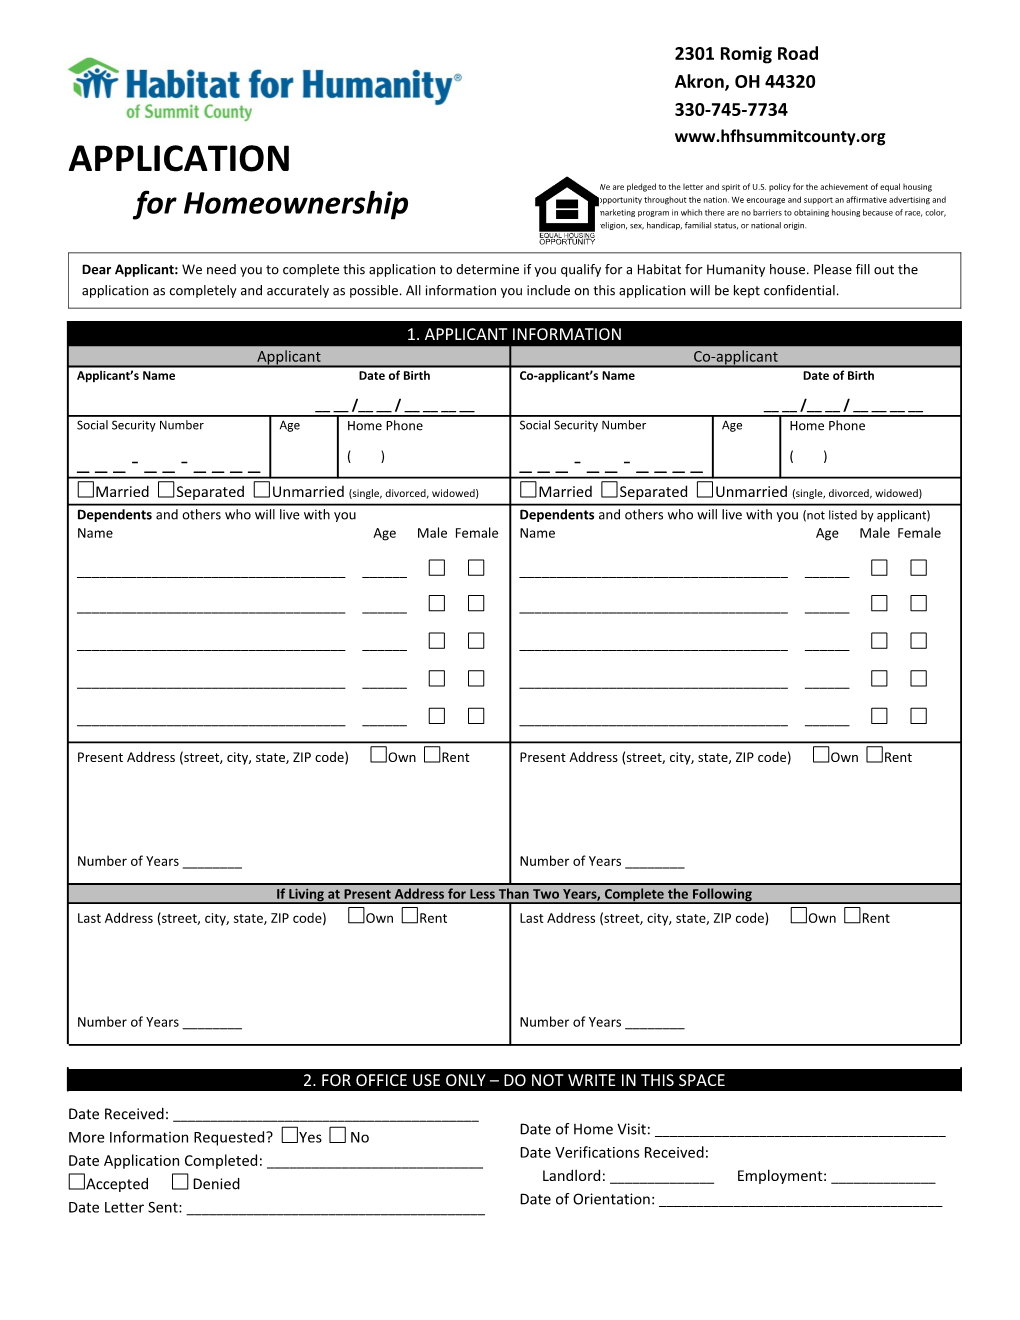 APPLICATION for Homeownership